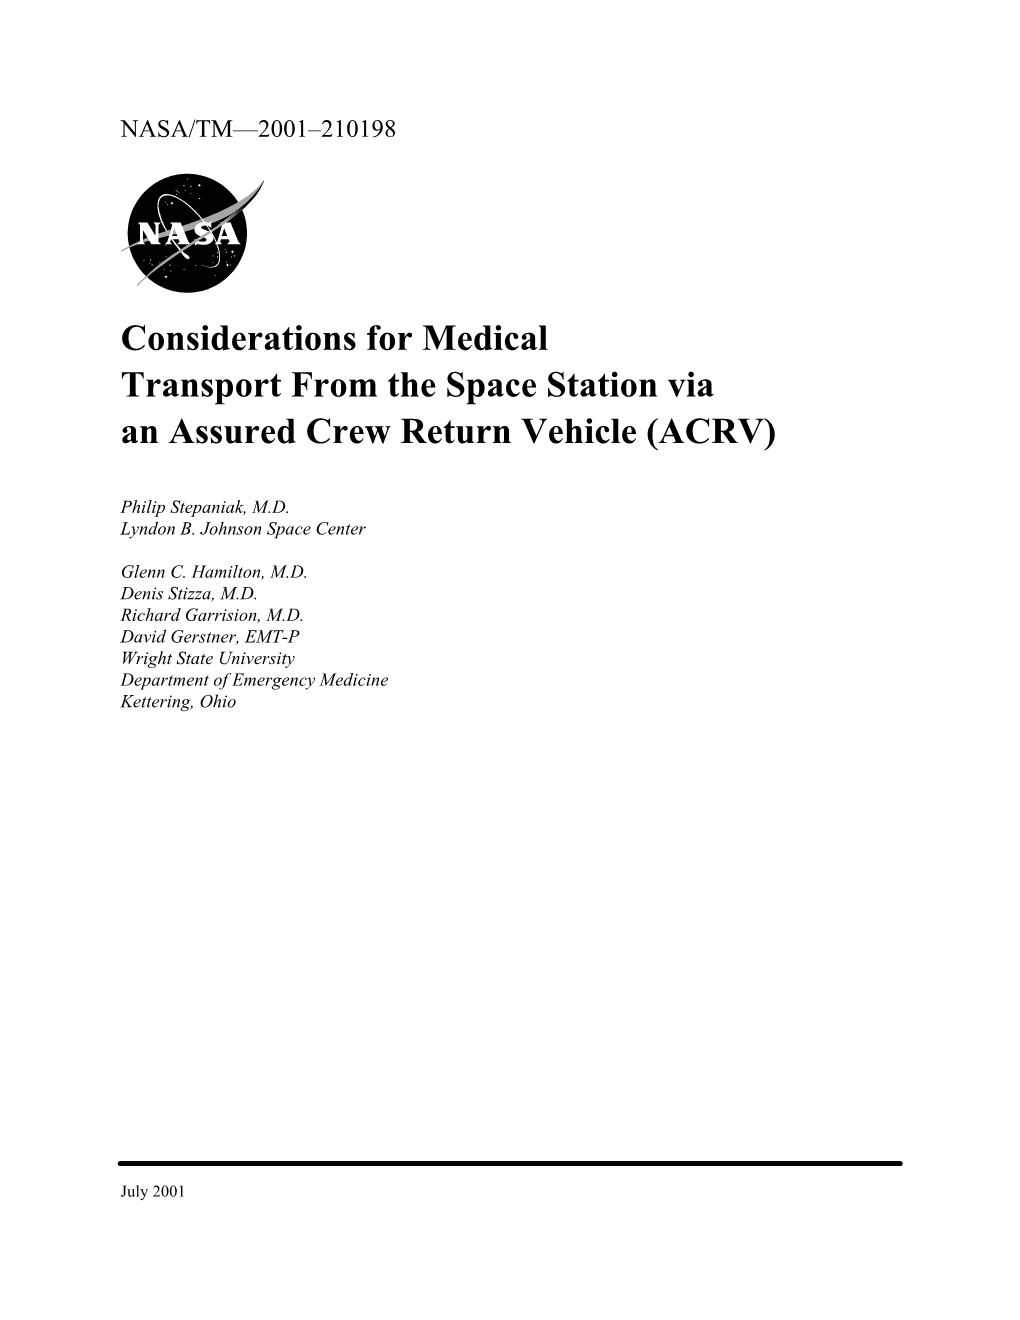 Considerations for Medical Transport from the Space Station Via an Assured Crew Return Vehicle (ACRV)